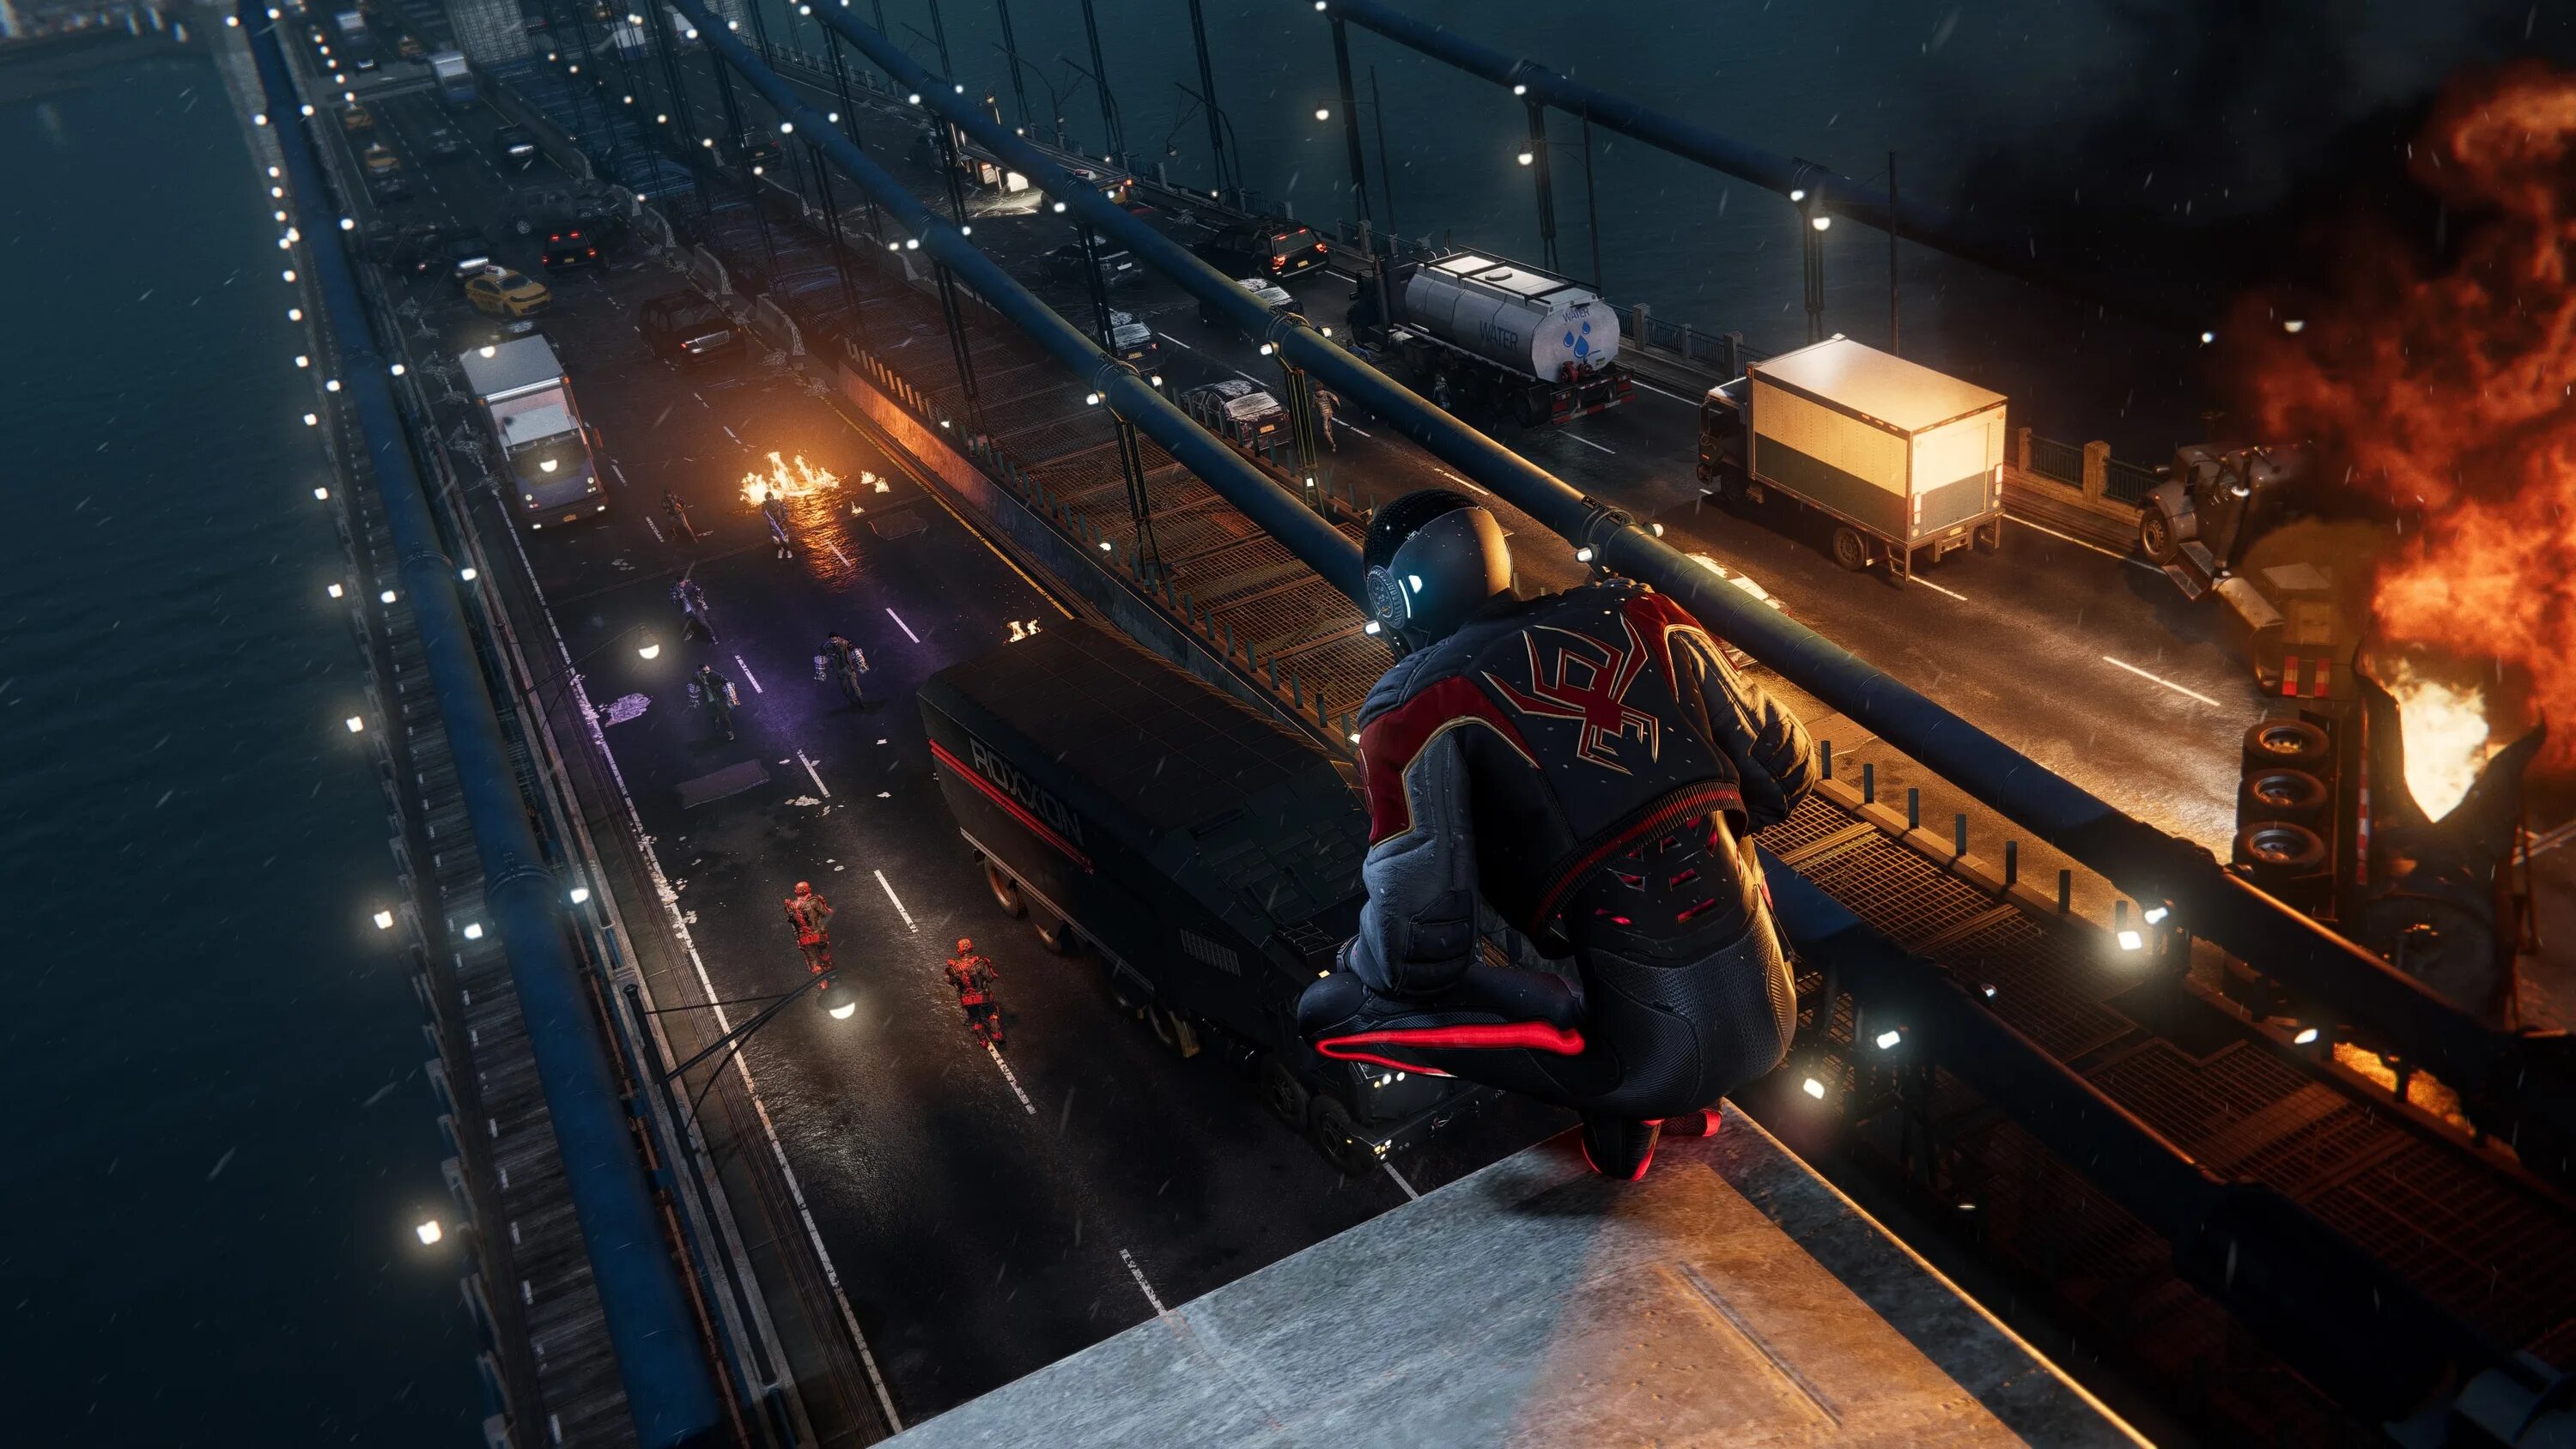 Miles morales game. Spider-man Miles morales ps5. Spider man Майлз Моралес ps5. Spider man ps5. Майлз Моралес человек паук 5.